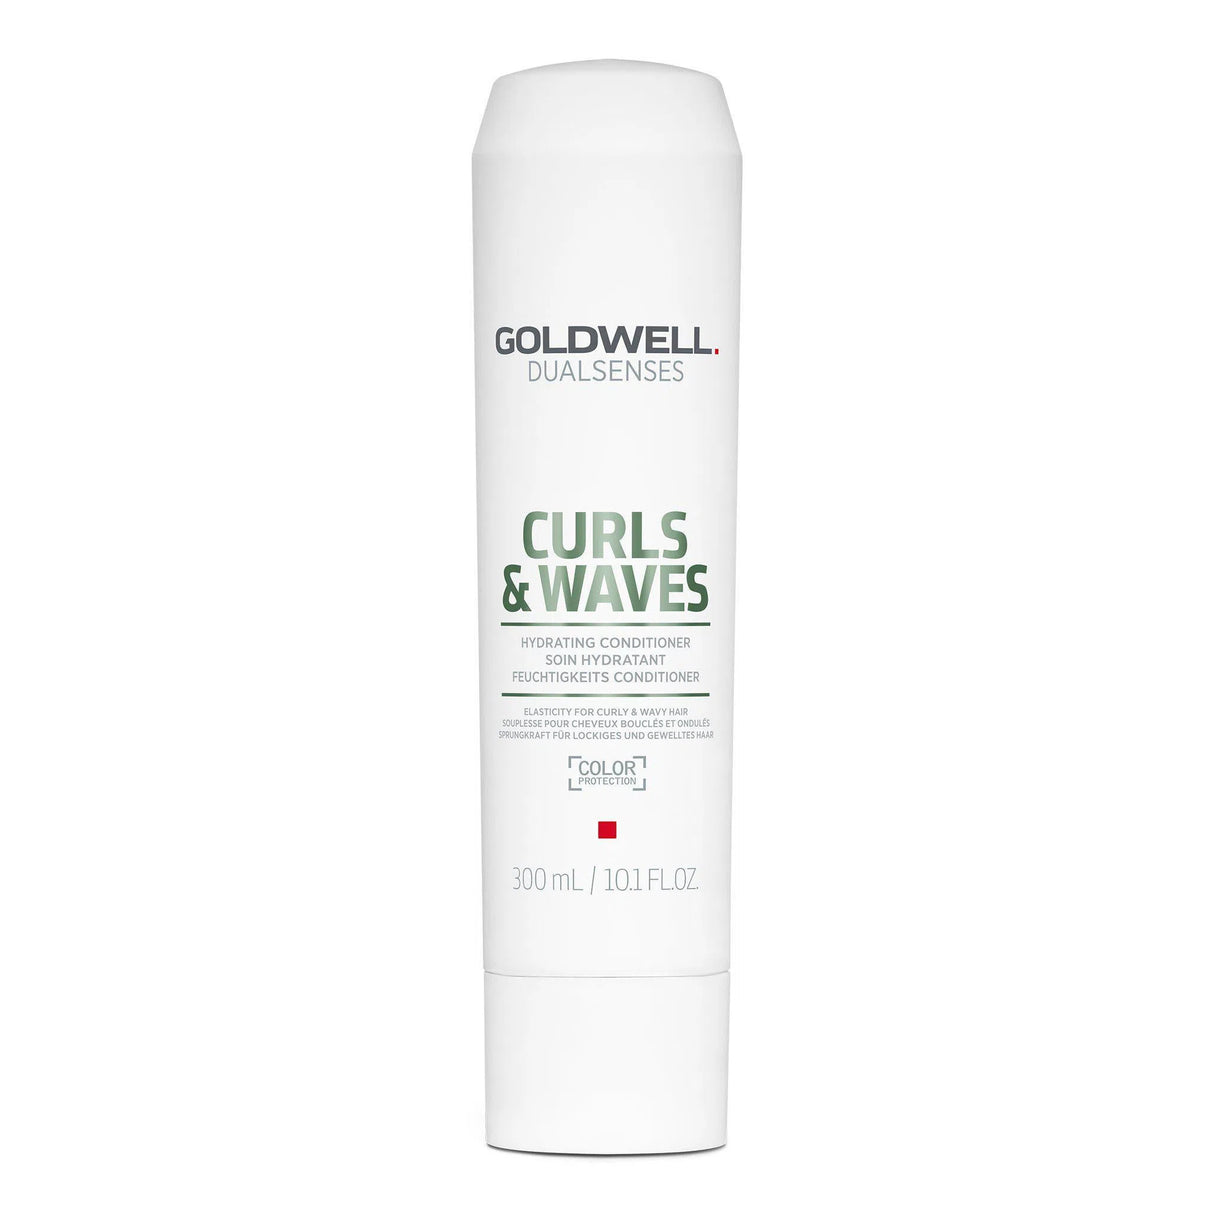 Curls + Waves Hydrating Conditioner